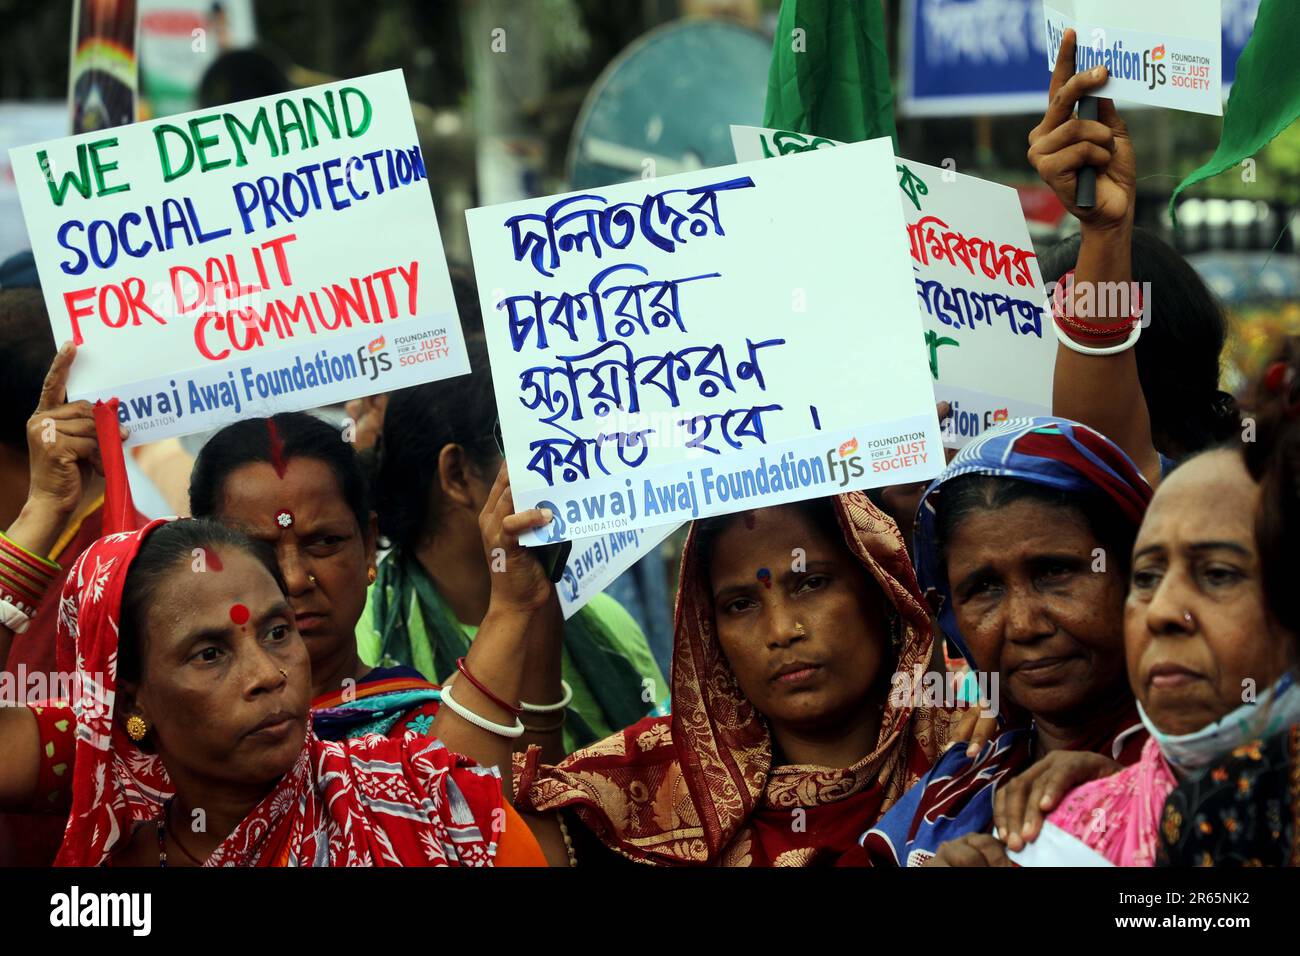 DHAKA, BANGLADESH - JUNE 2: Dalit and excluded community members hold signs and chant as they participate in a protest demanding human rights in front Stock Photo